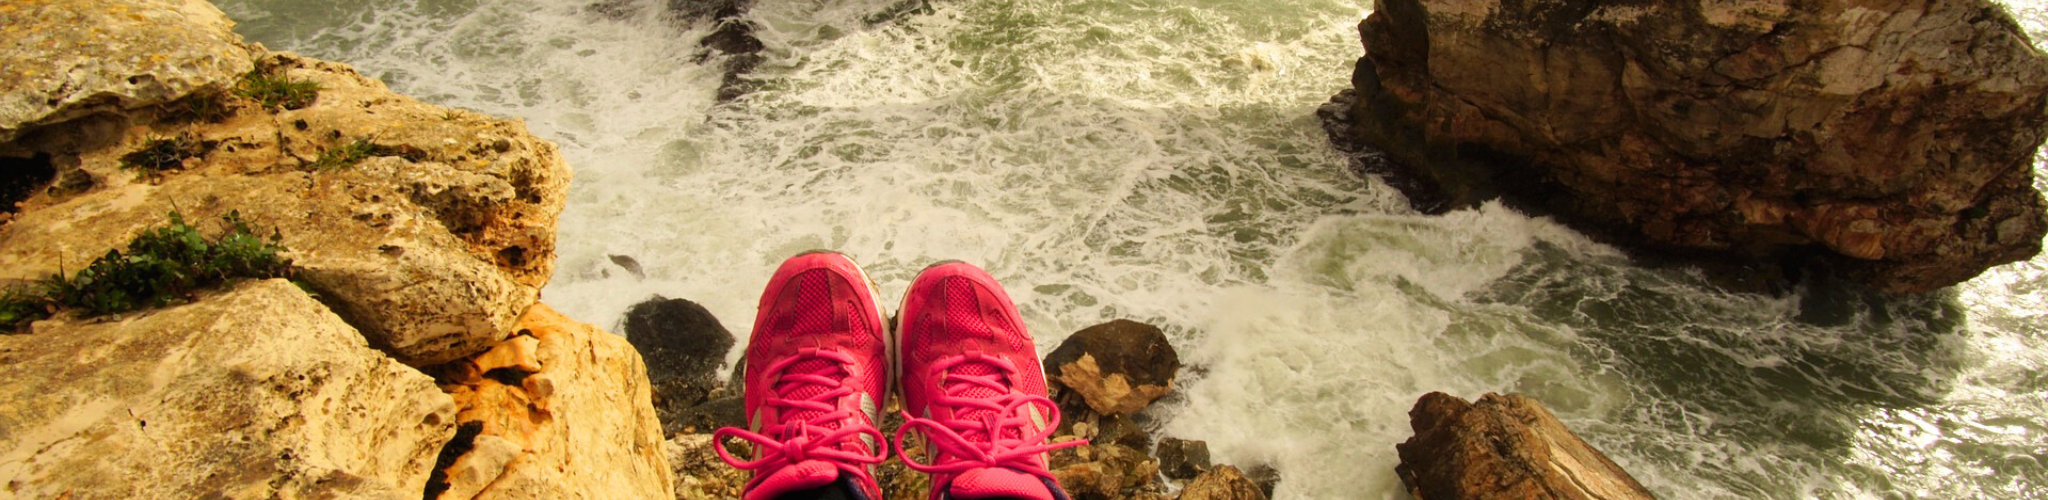 Stock photo of someone sitting on the edge of a rock over the ocean, wearing pink hiking sneakers.